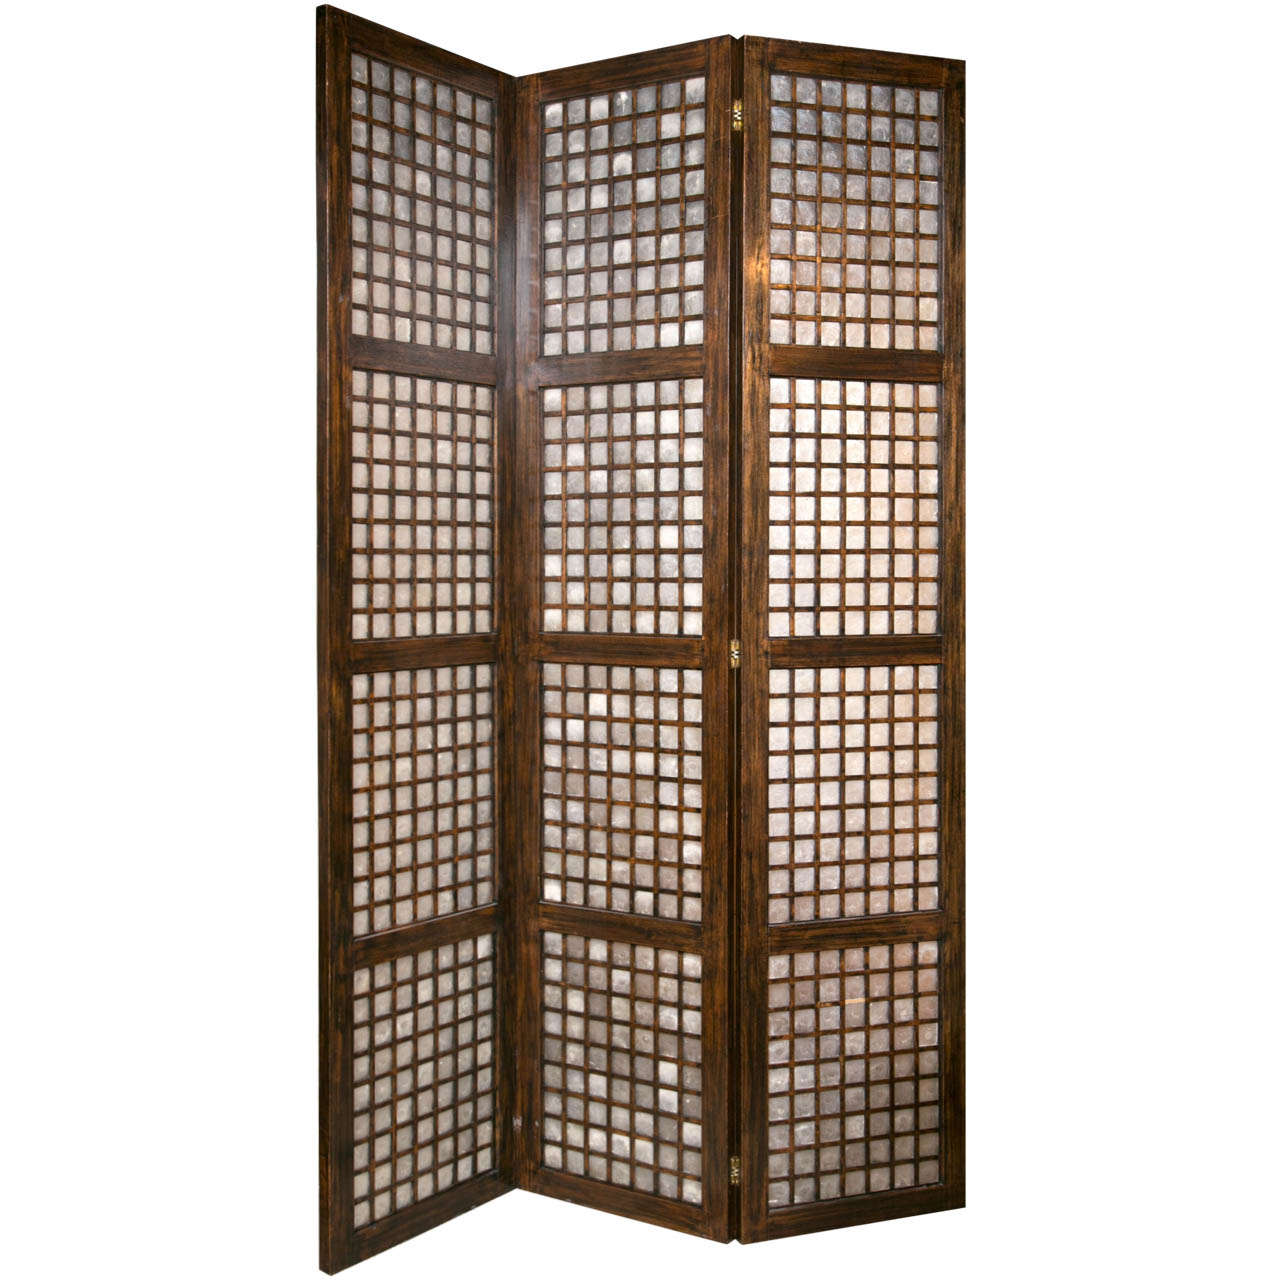 20th C Three Panel Screen with inset Shells